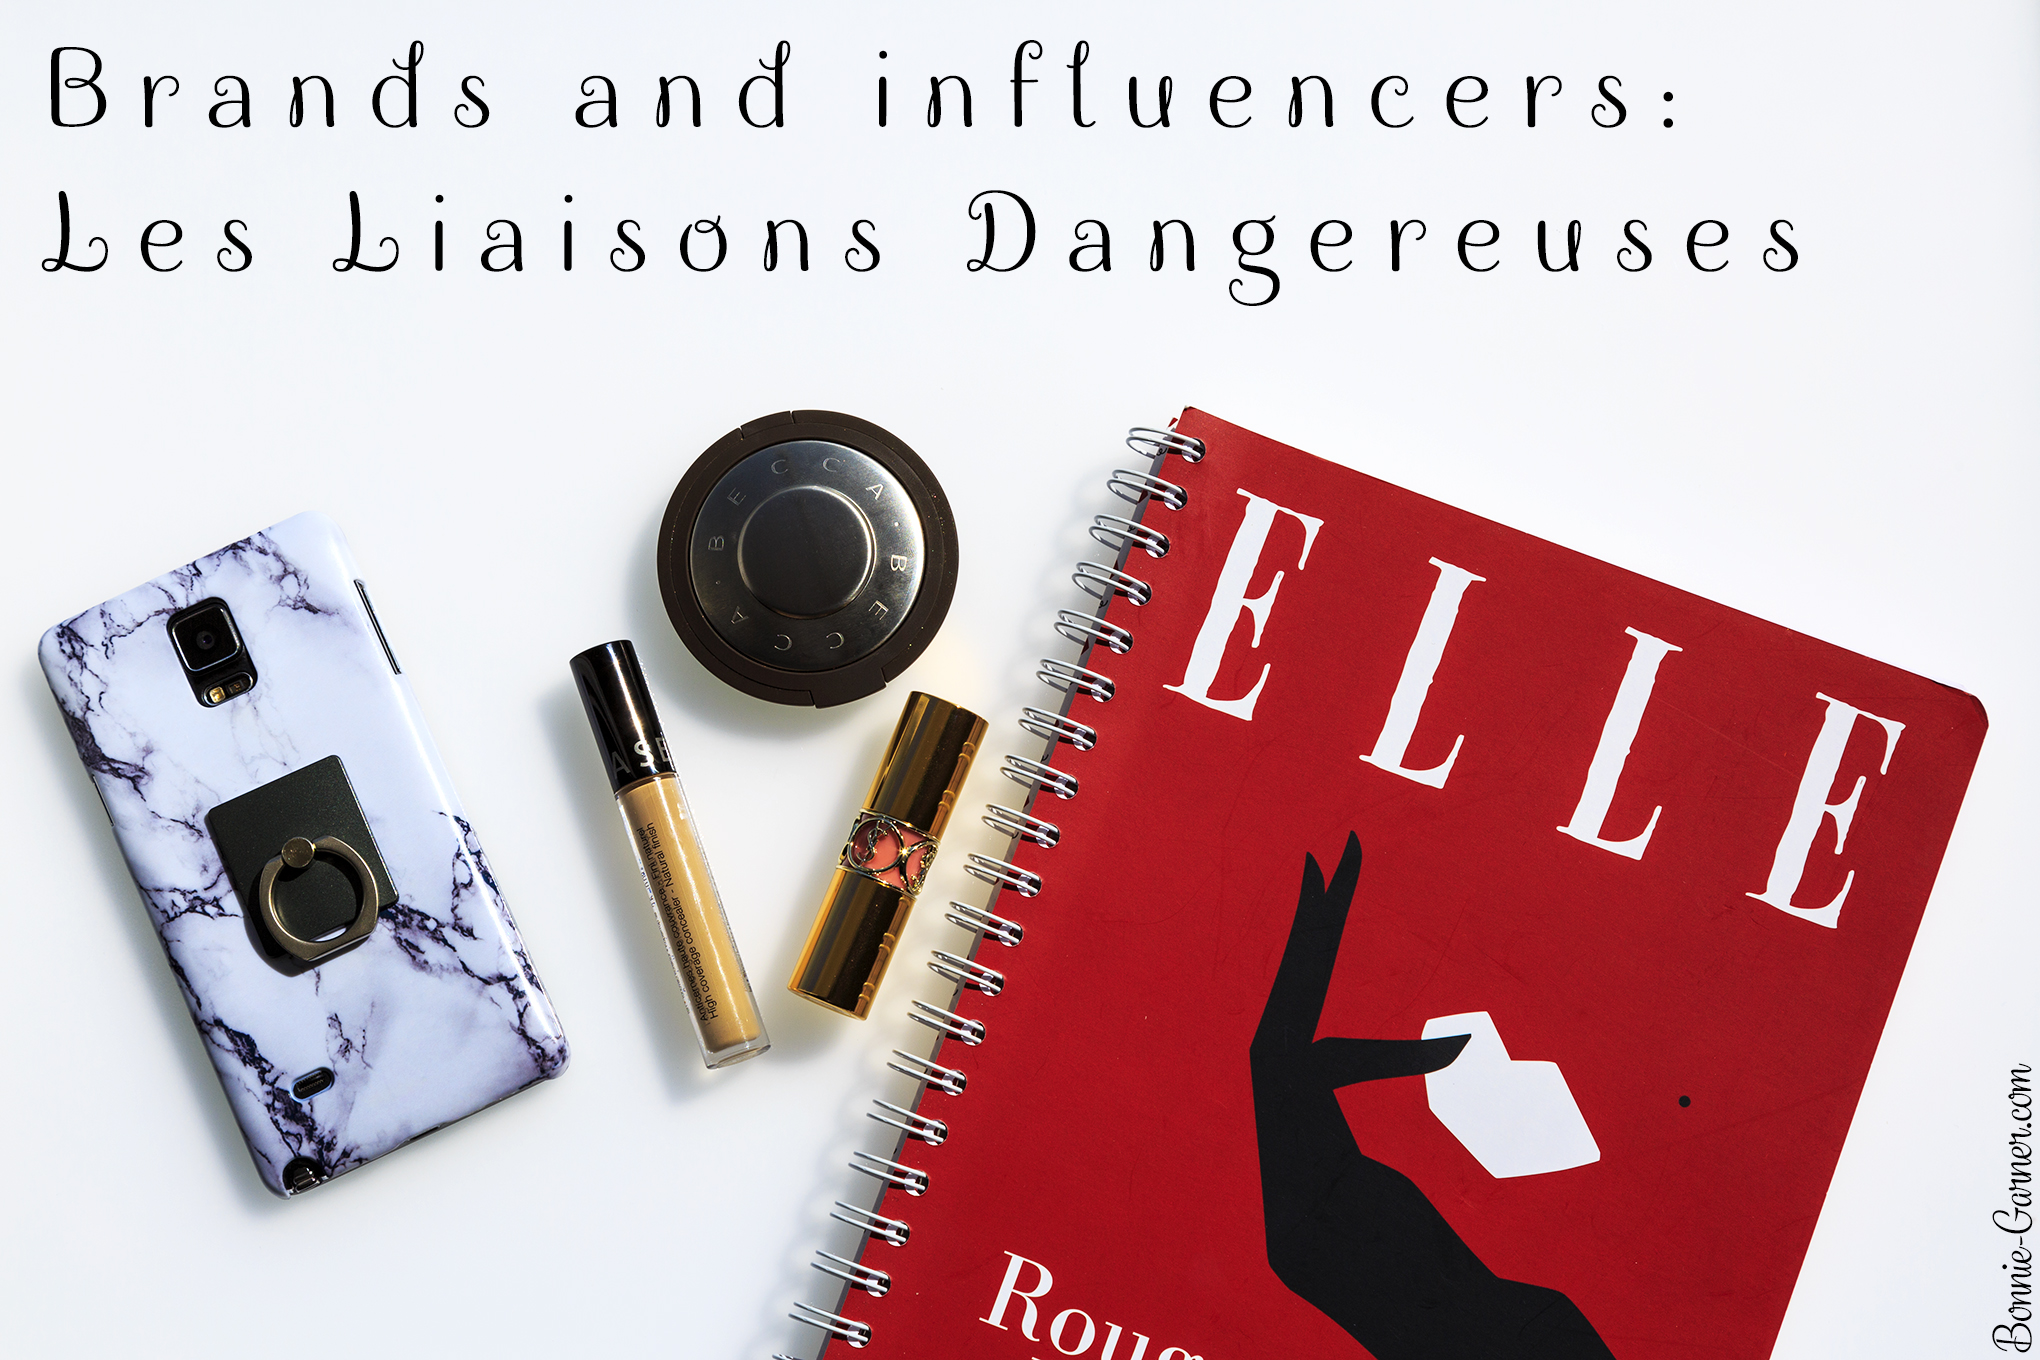 Brands and influencers: Les Liaisons Dangereuses